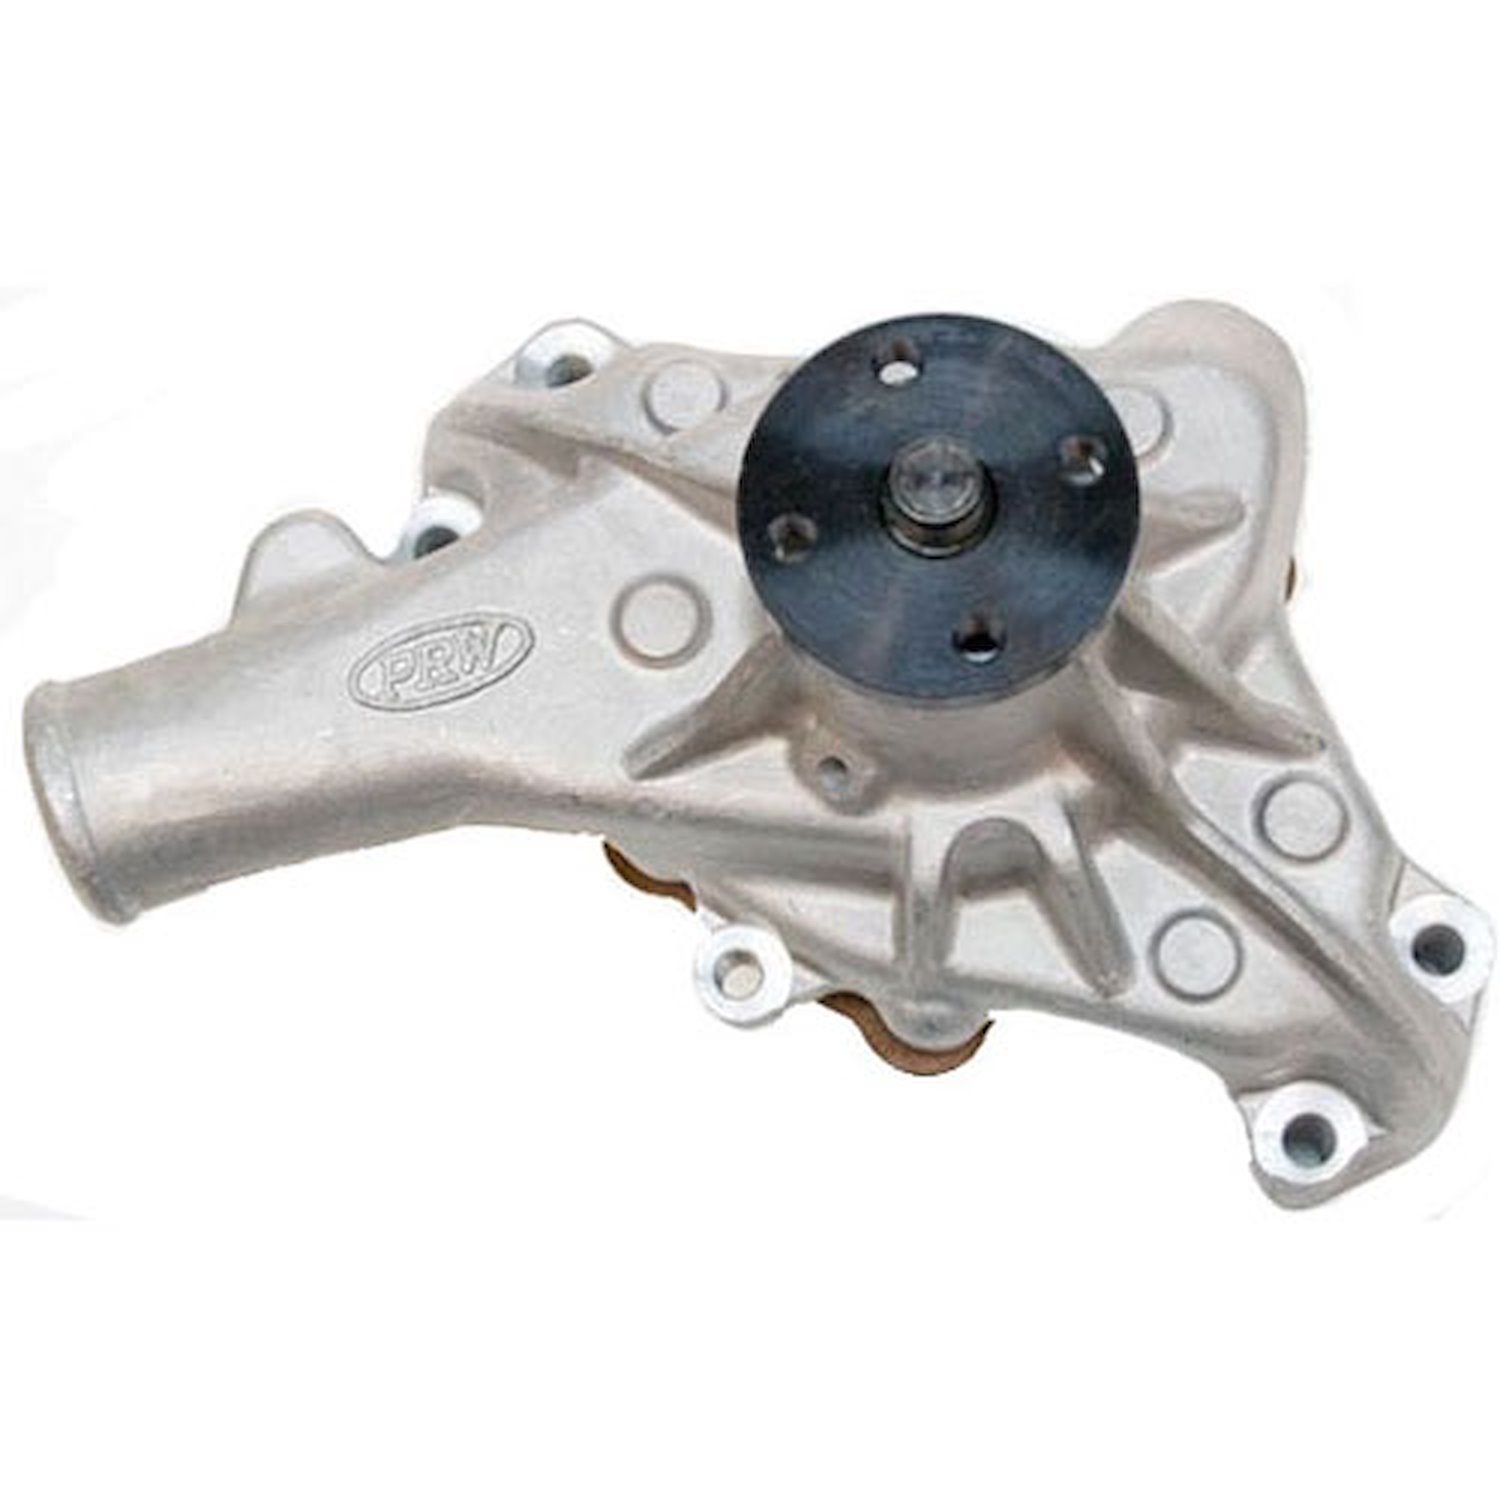 High-Performance Aluminum Water Pump 1987-95 Chevy V6 and